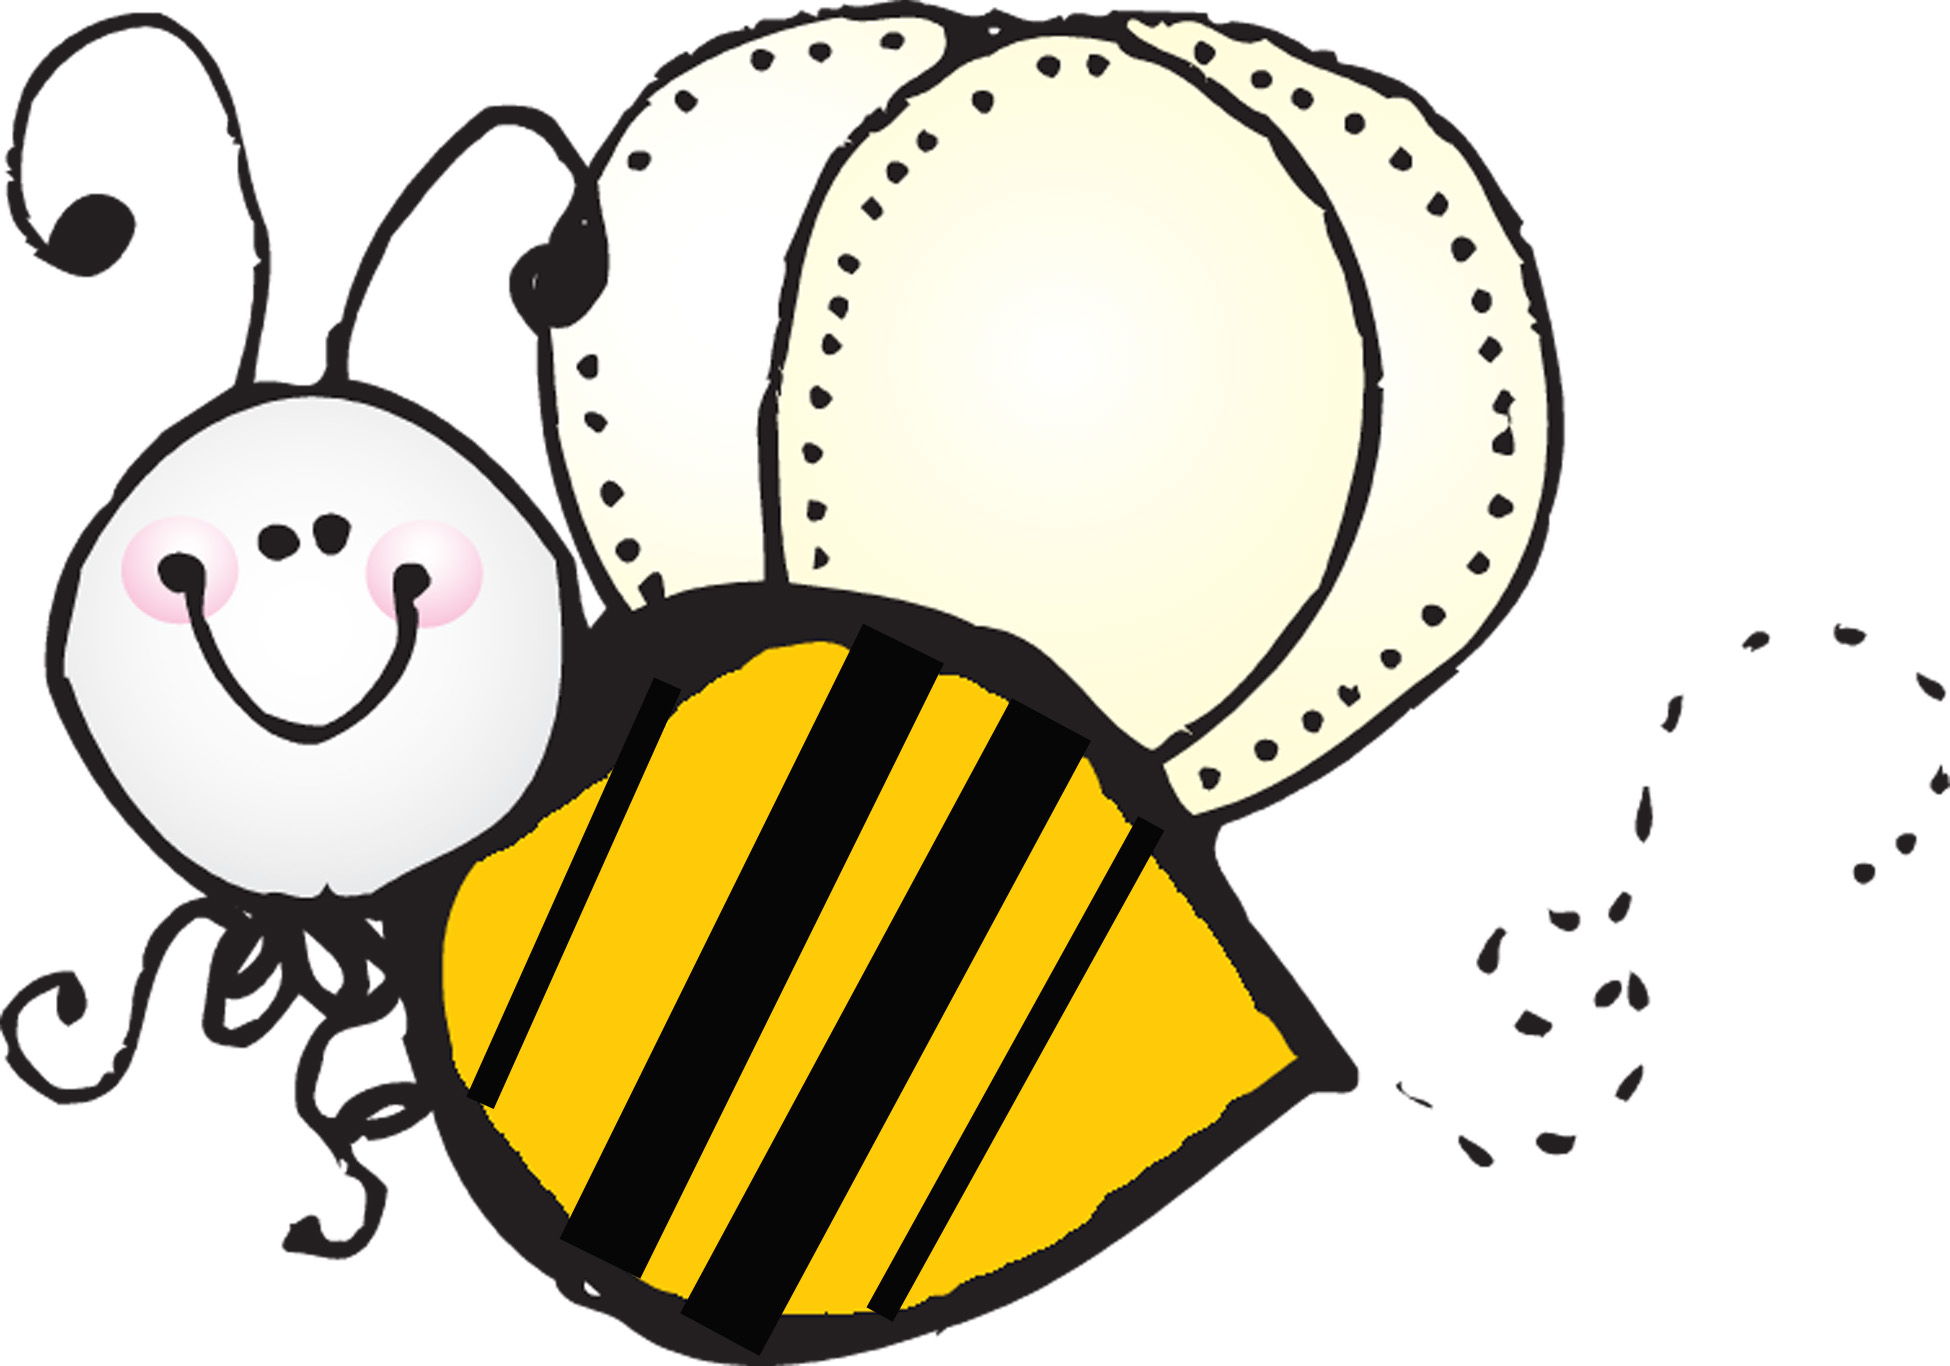 Spelling Bee Clipart   Clipart Panda   Free Clipart Images